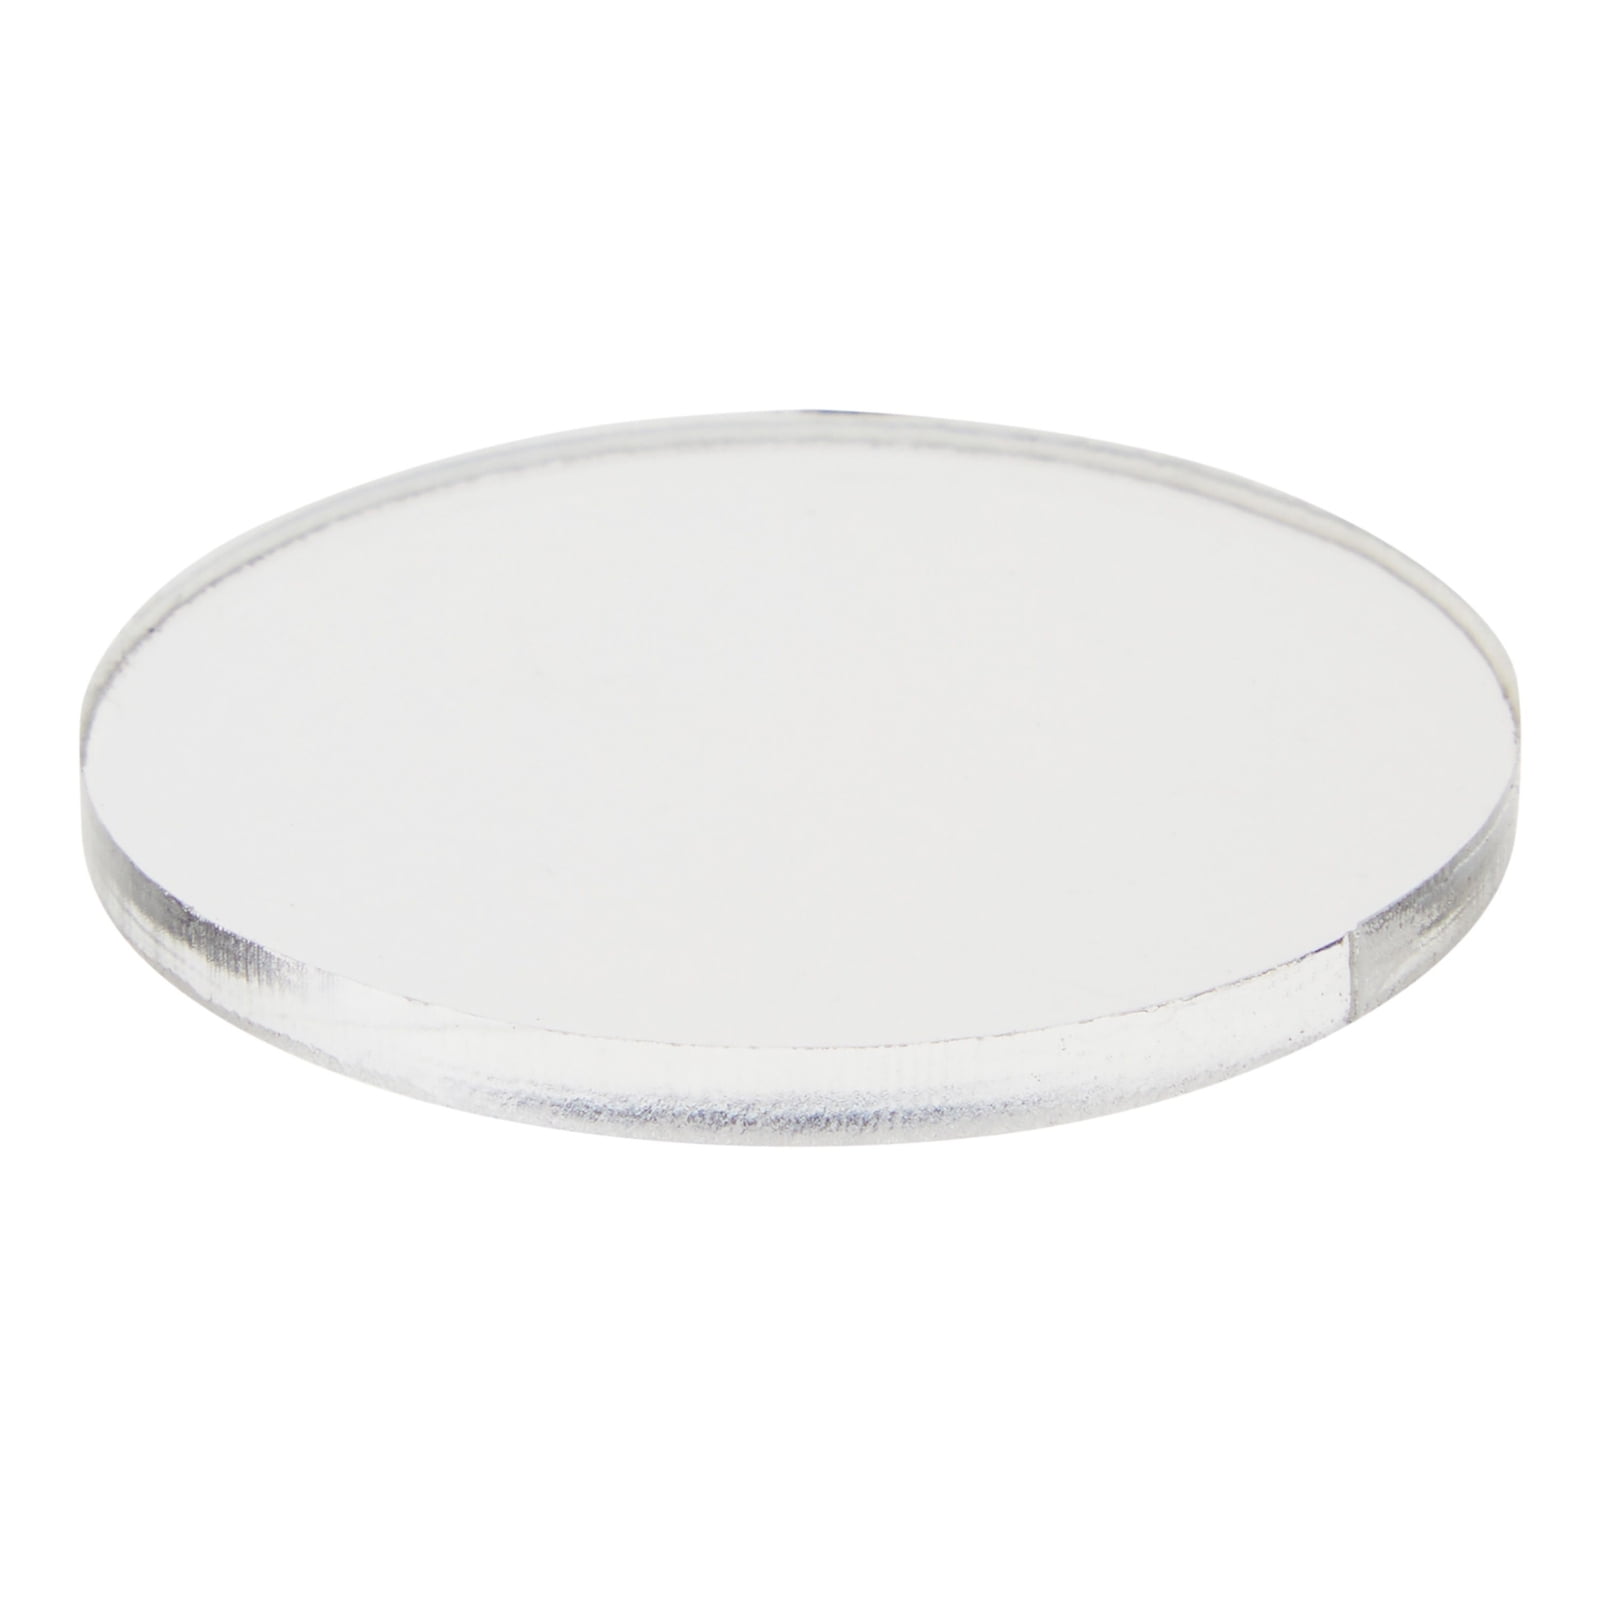 MUKLEI 60 Pieces 3 inch Clear Round Acrylic disks, 1/8 Thick Clear Acrylic Circles Transparent Acrylic Discs with Protective Films1